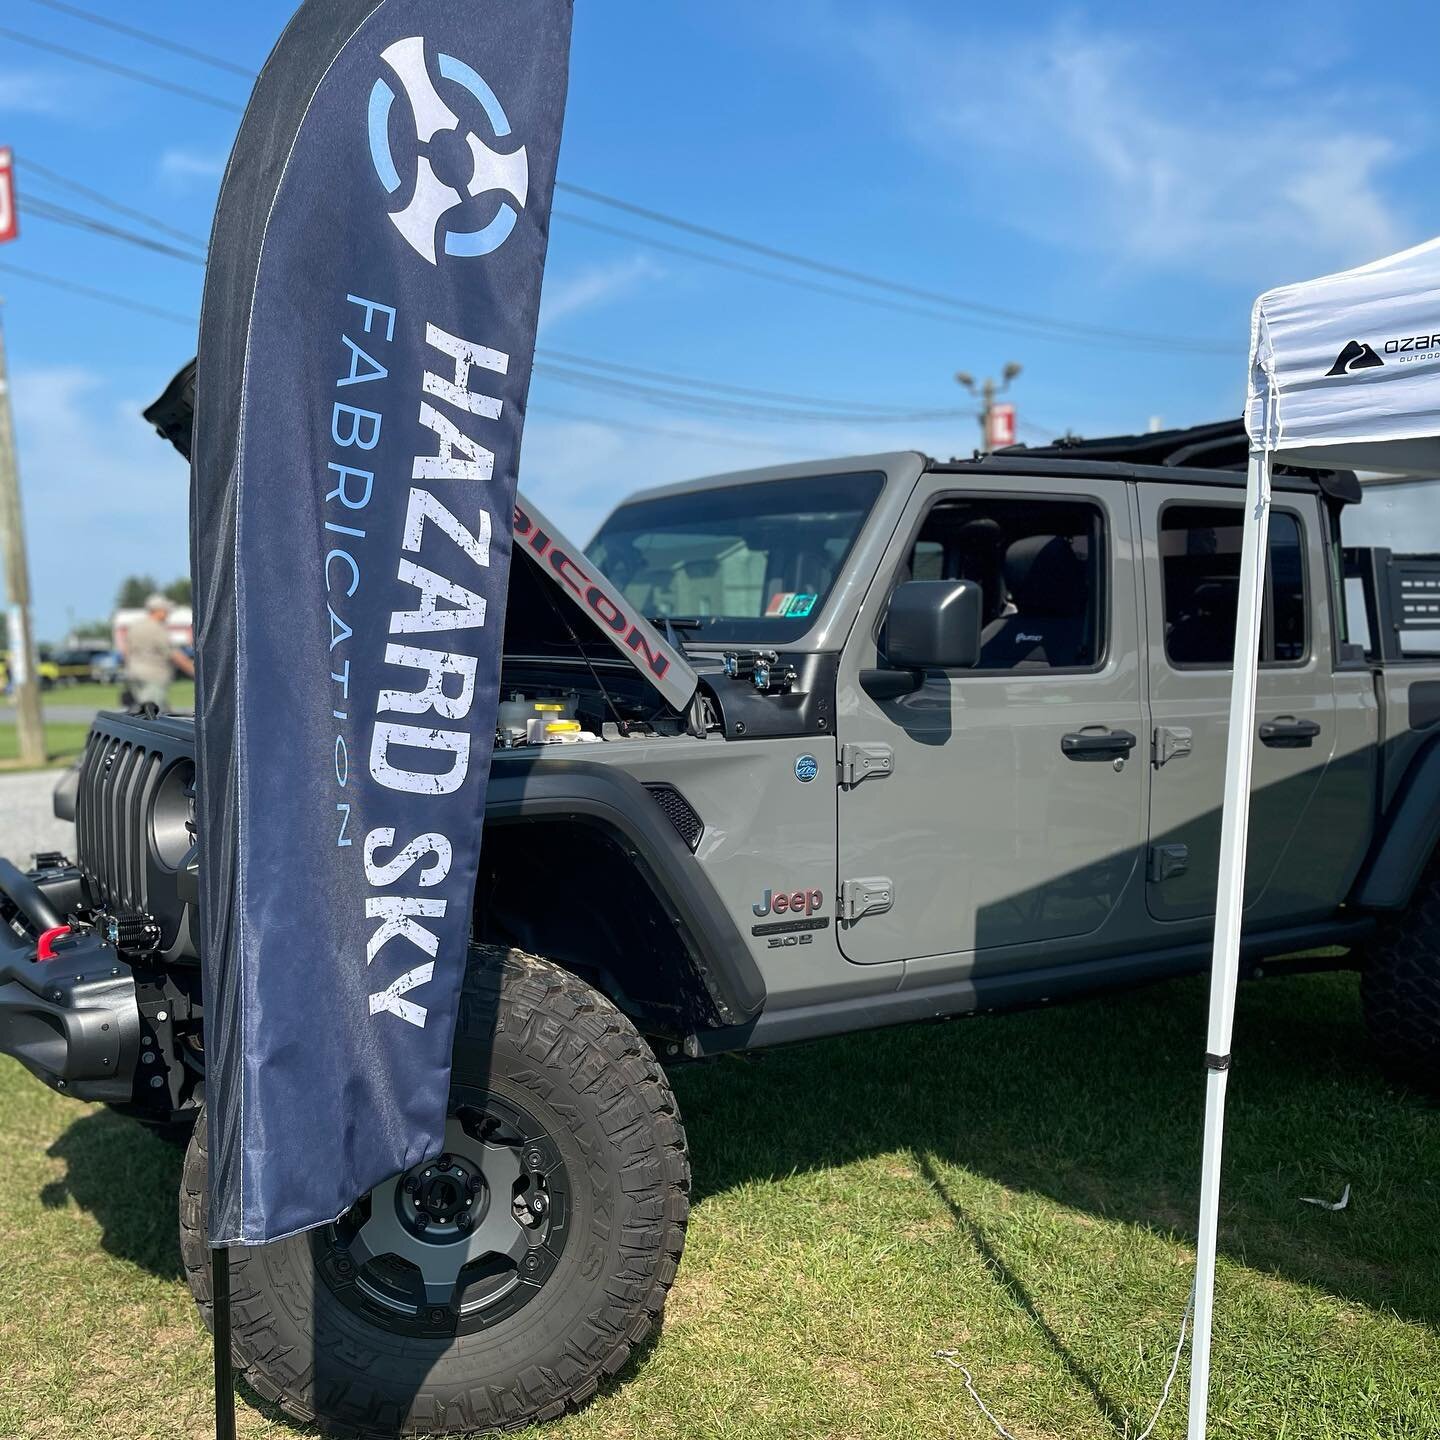 We&rsquo;re out here at the PA All Breeds Jeep show! Make sure to stop by. .
.
.
#hazardsky #madeinbaltimore #waterjet #fabrication #builtnotbought #omax #maxiem #jeep #powdercoating #jeepwrangler #jt #jeepgladiator #jeeprubicon #rubicon #wrangler #j